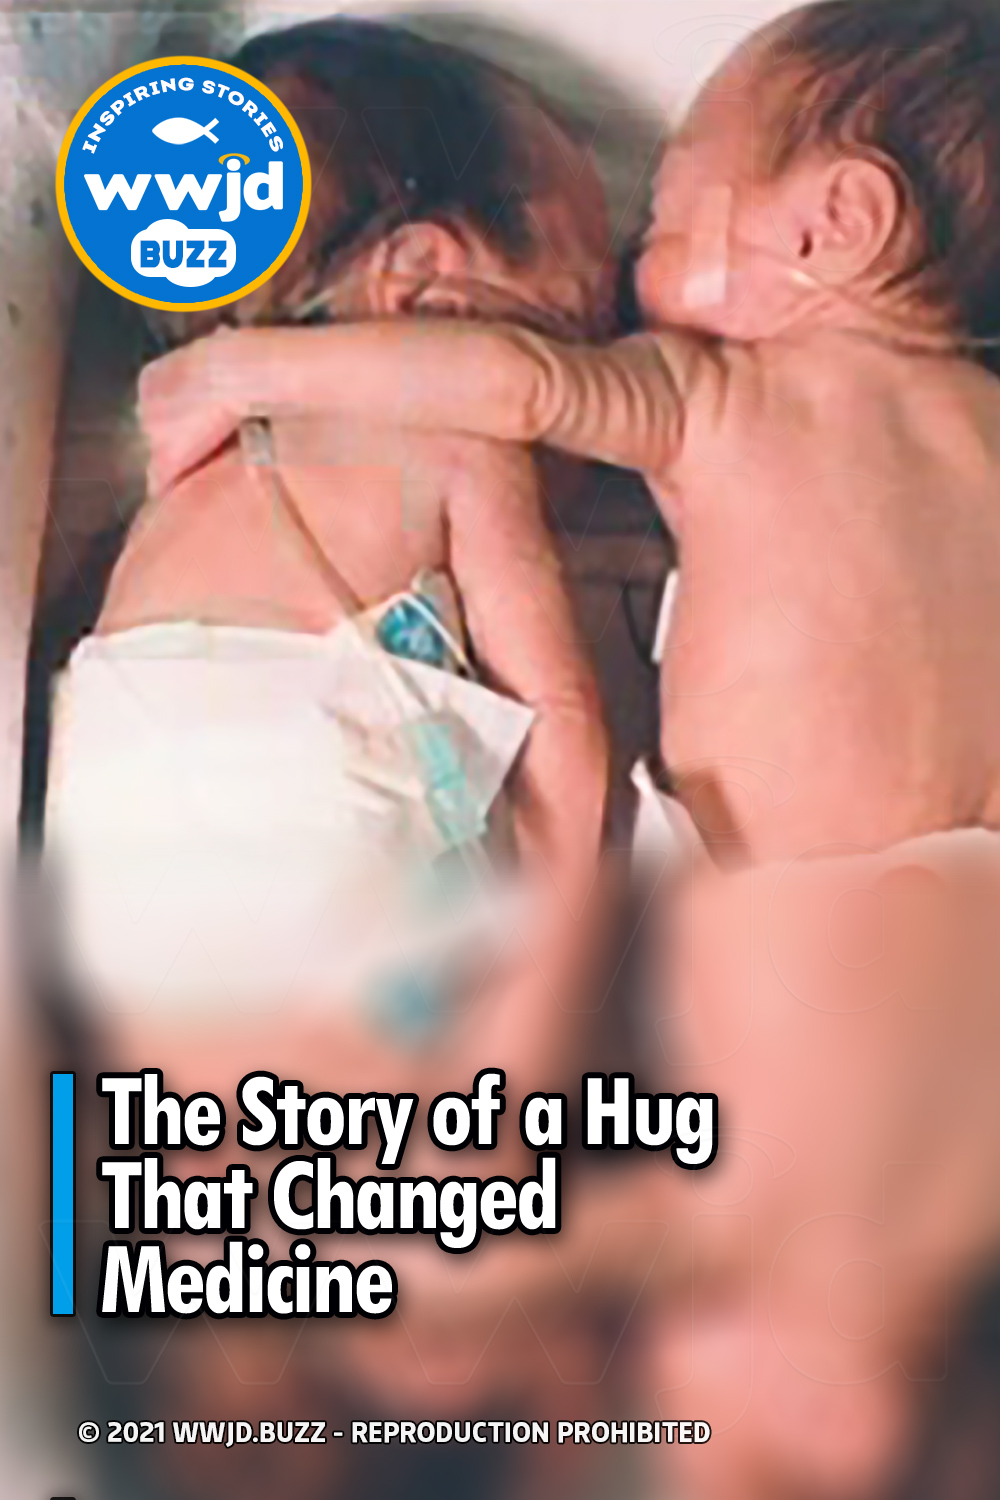 The Story of a Hug That Changed Medicine